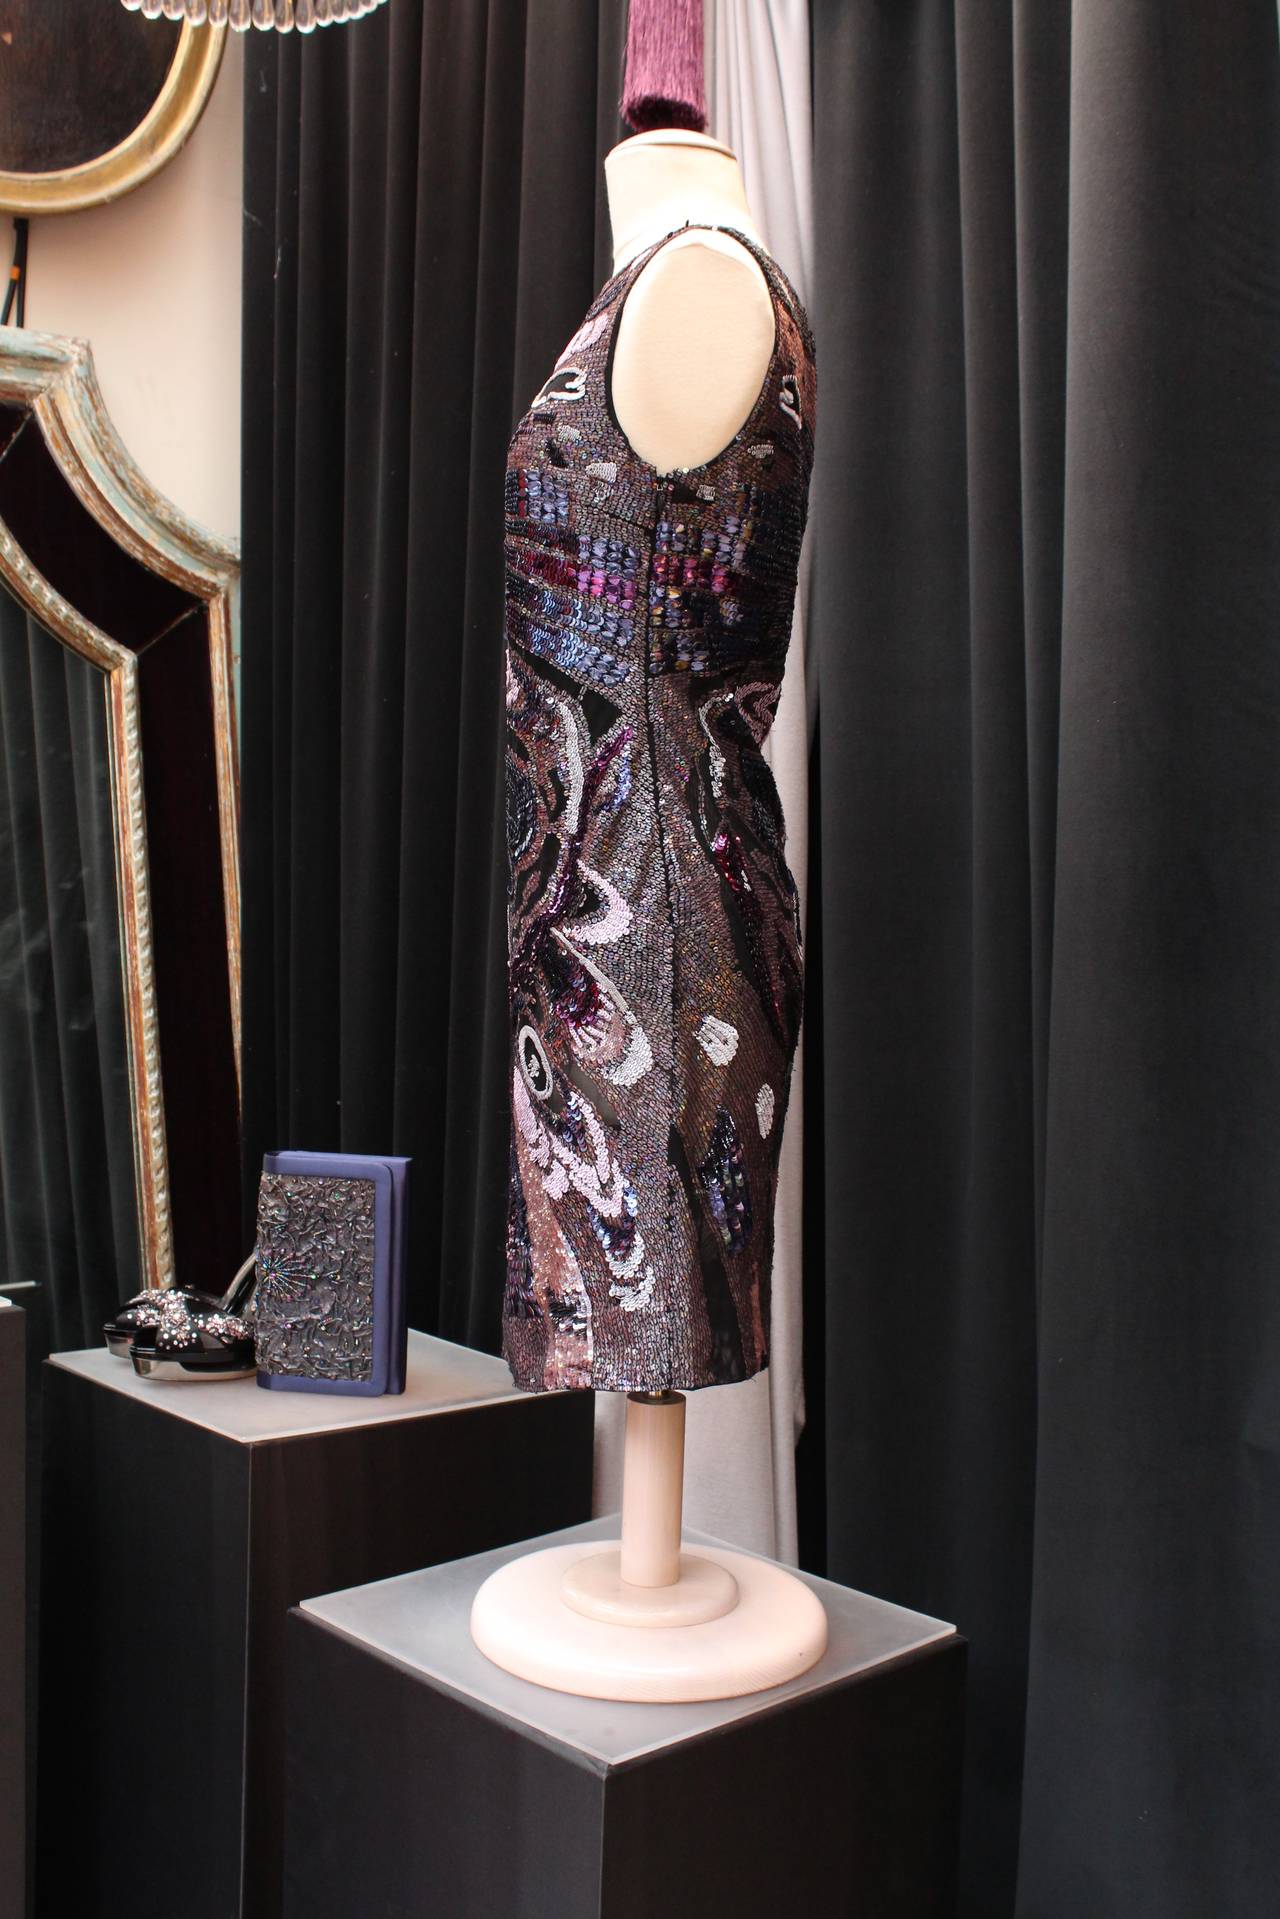 EMILIO PUCCI (Made in Italy) Short sleeveless dress composed of black tulle entirely covered in shiny sequins pink, blue, black, pale pink and auburn figuring a psychedelic and glam rock pattern .
The dress closes thanks to a black zipper on the